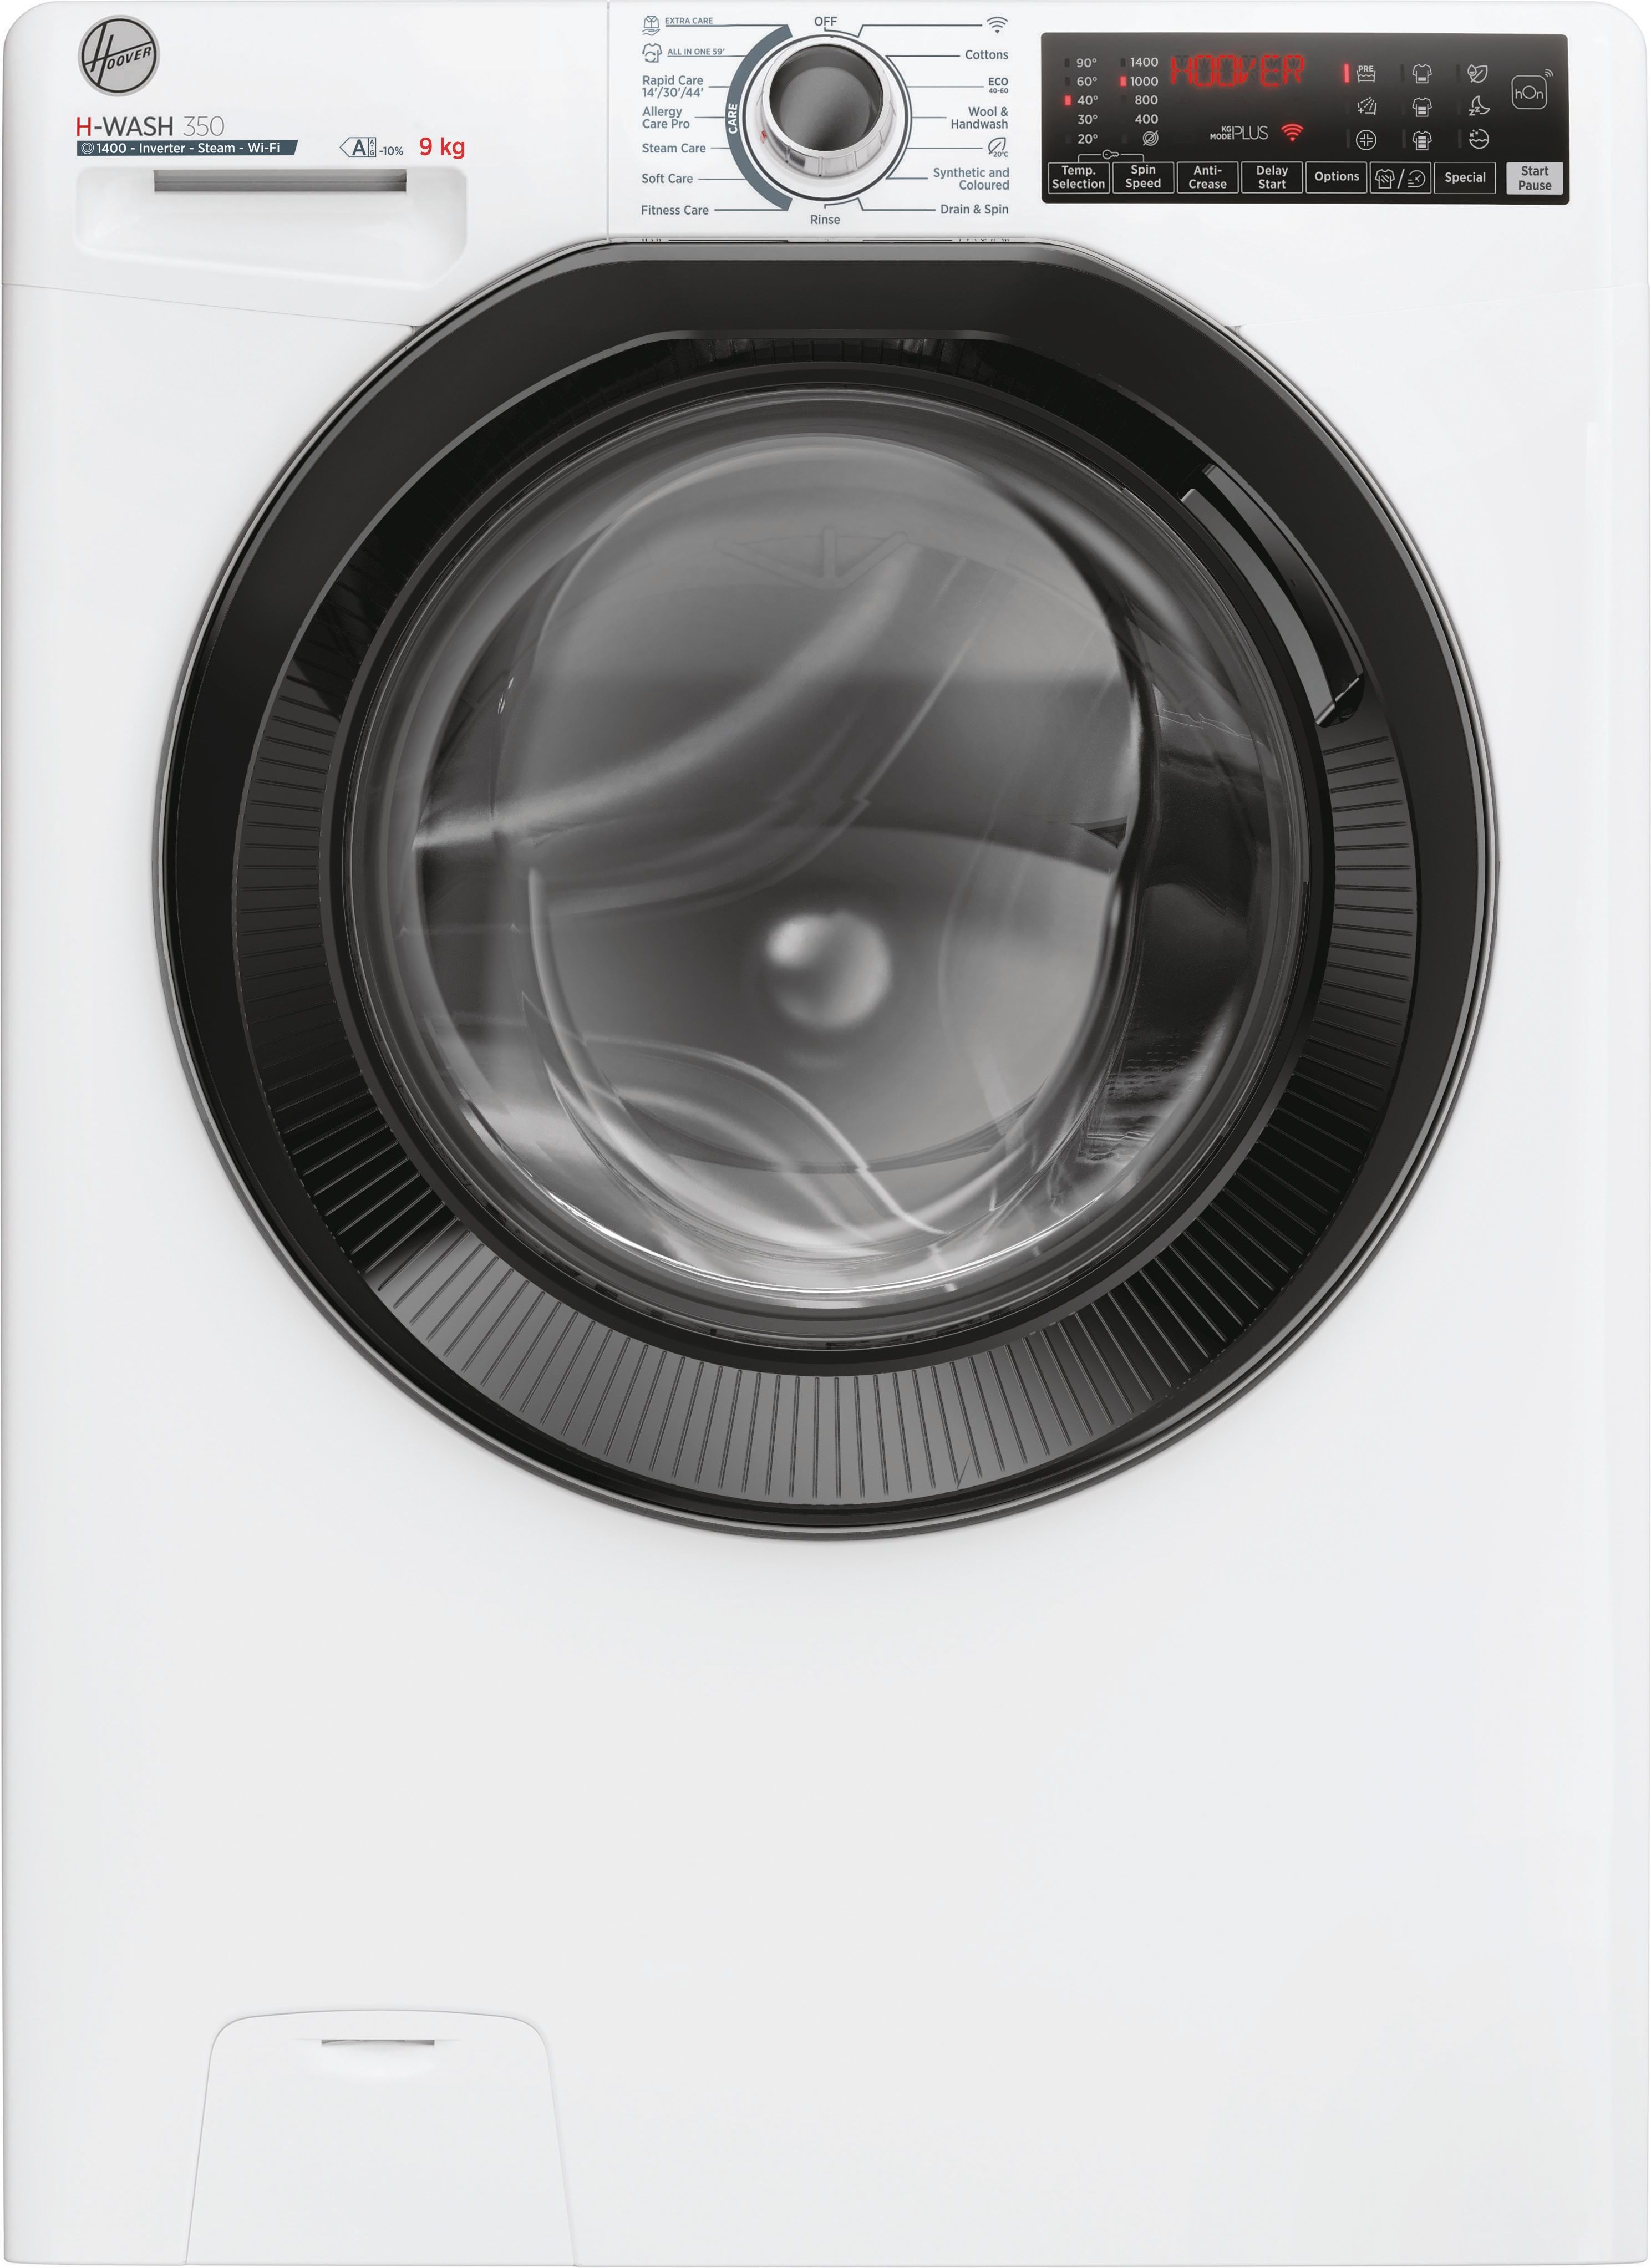 Hoover H-WASH 350 H3WPS496TAMB6-80 9kg Washing Machine with 1400 rpm - White - A Rated, White